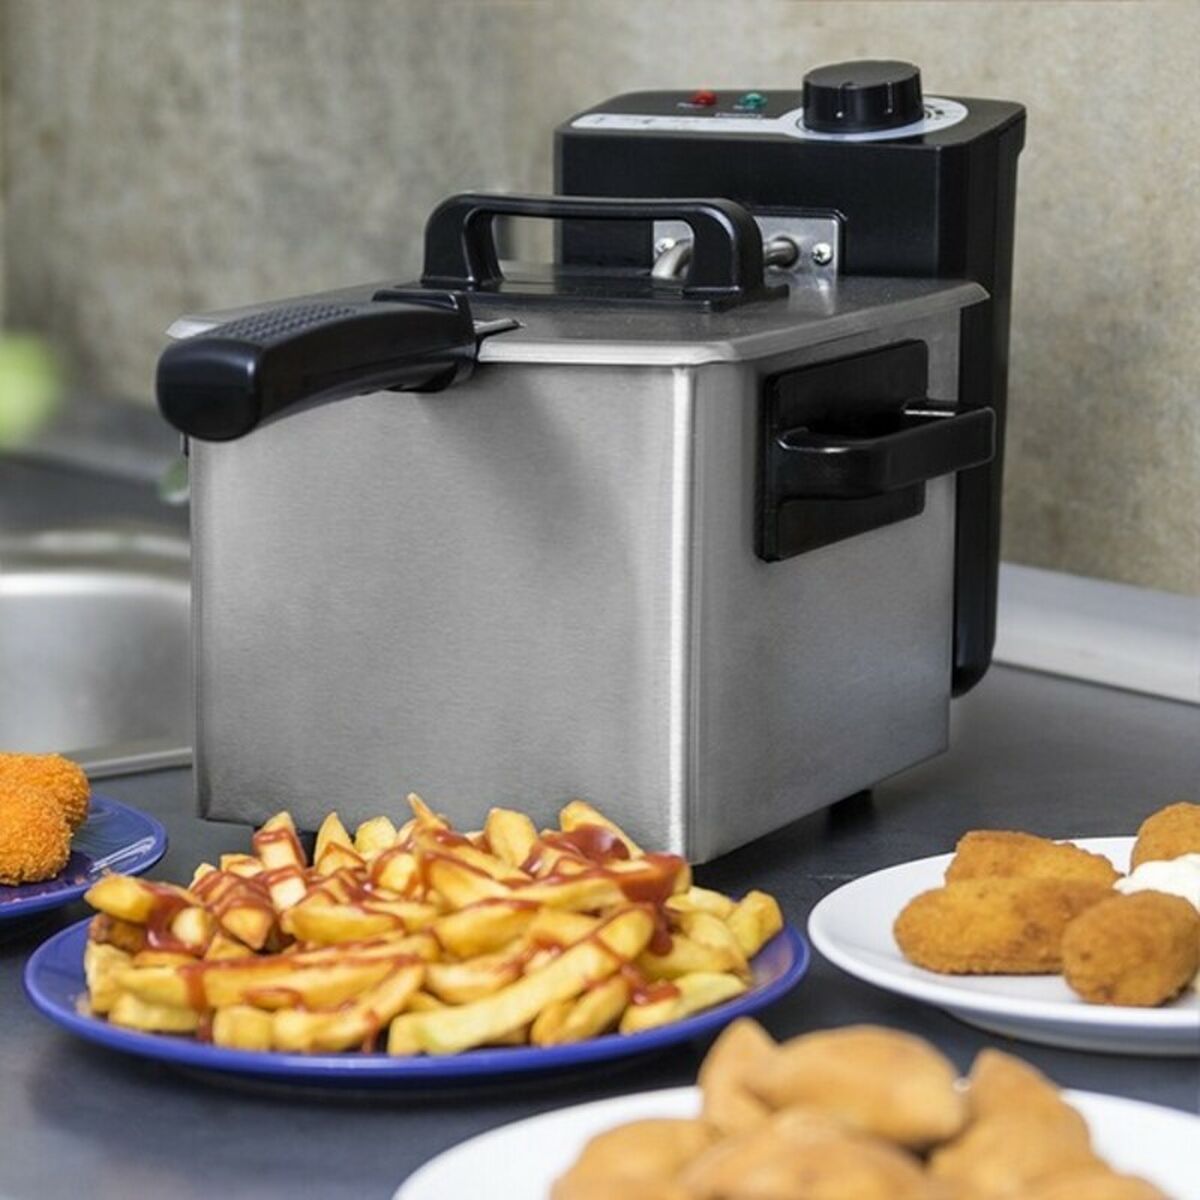 Fritteuse Cecotec Cleanfry 1,5 L 1000W Rostfreier stahl - AWK Flagship